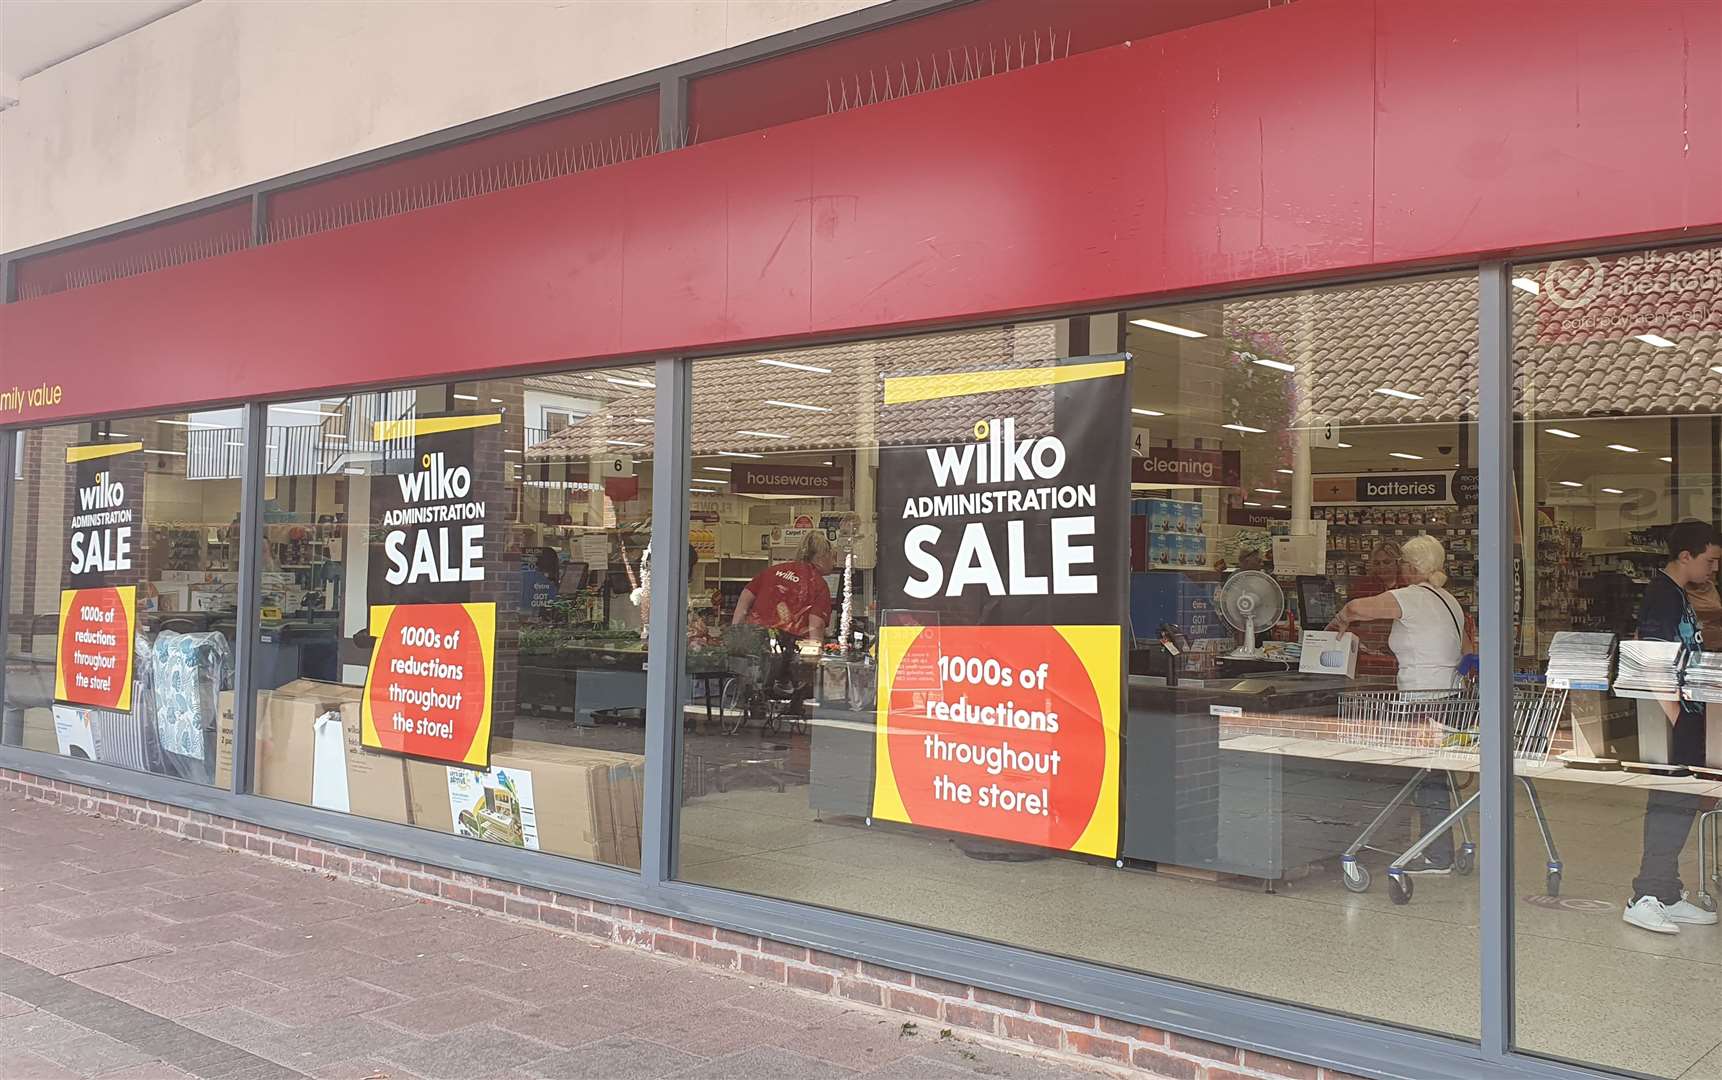 Wilko announced its administration sale this month after failing to secure emergency funding